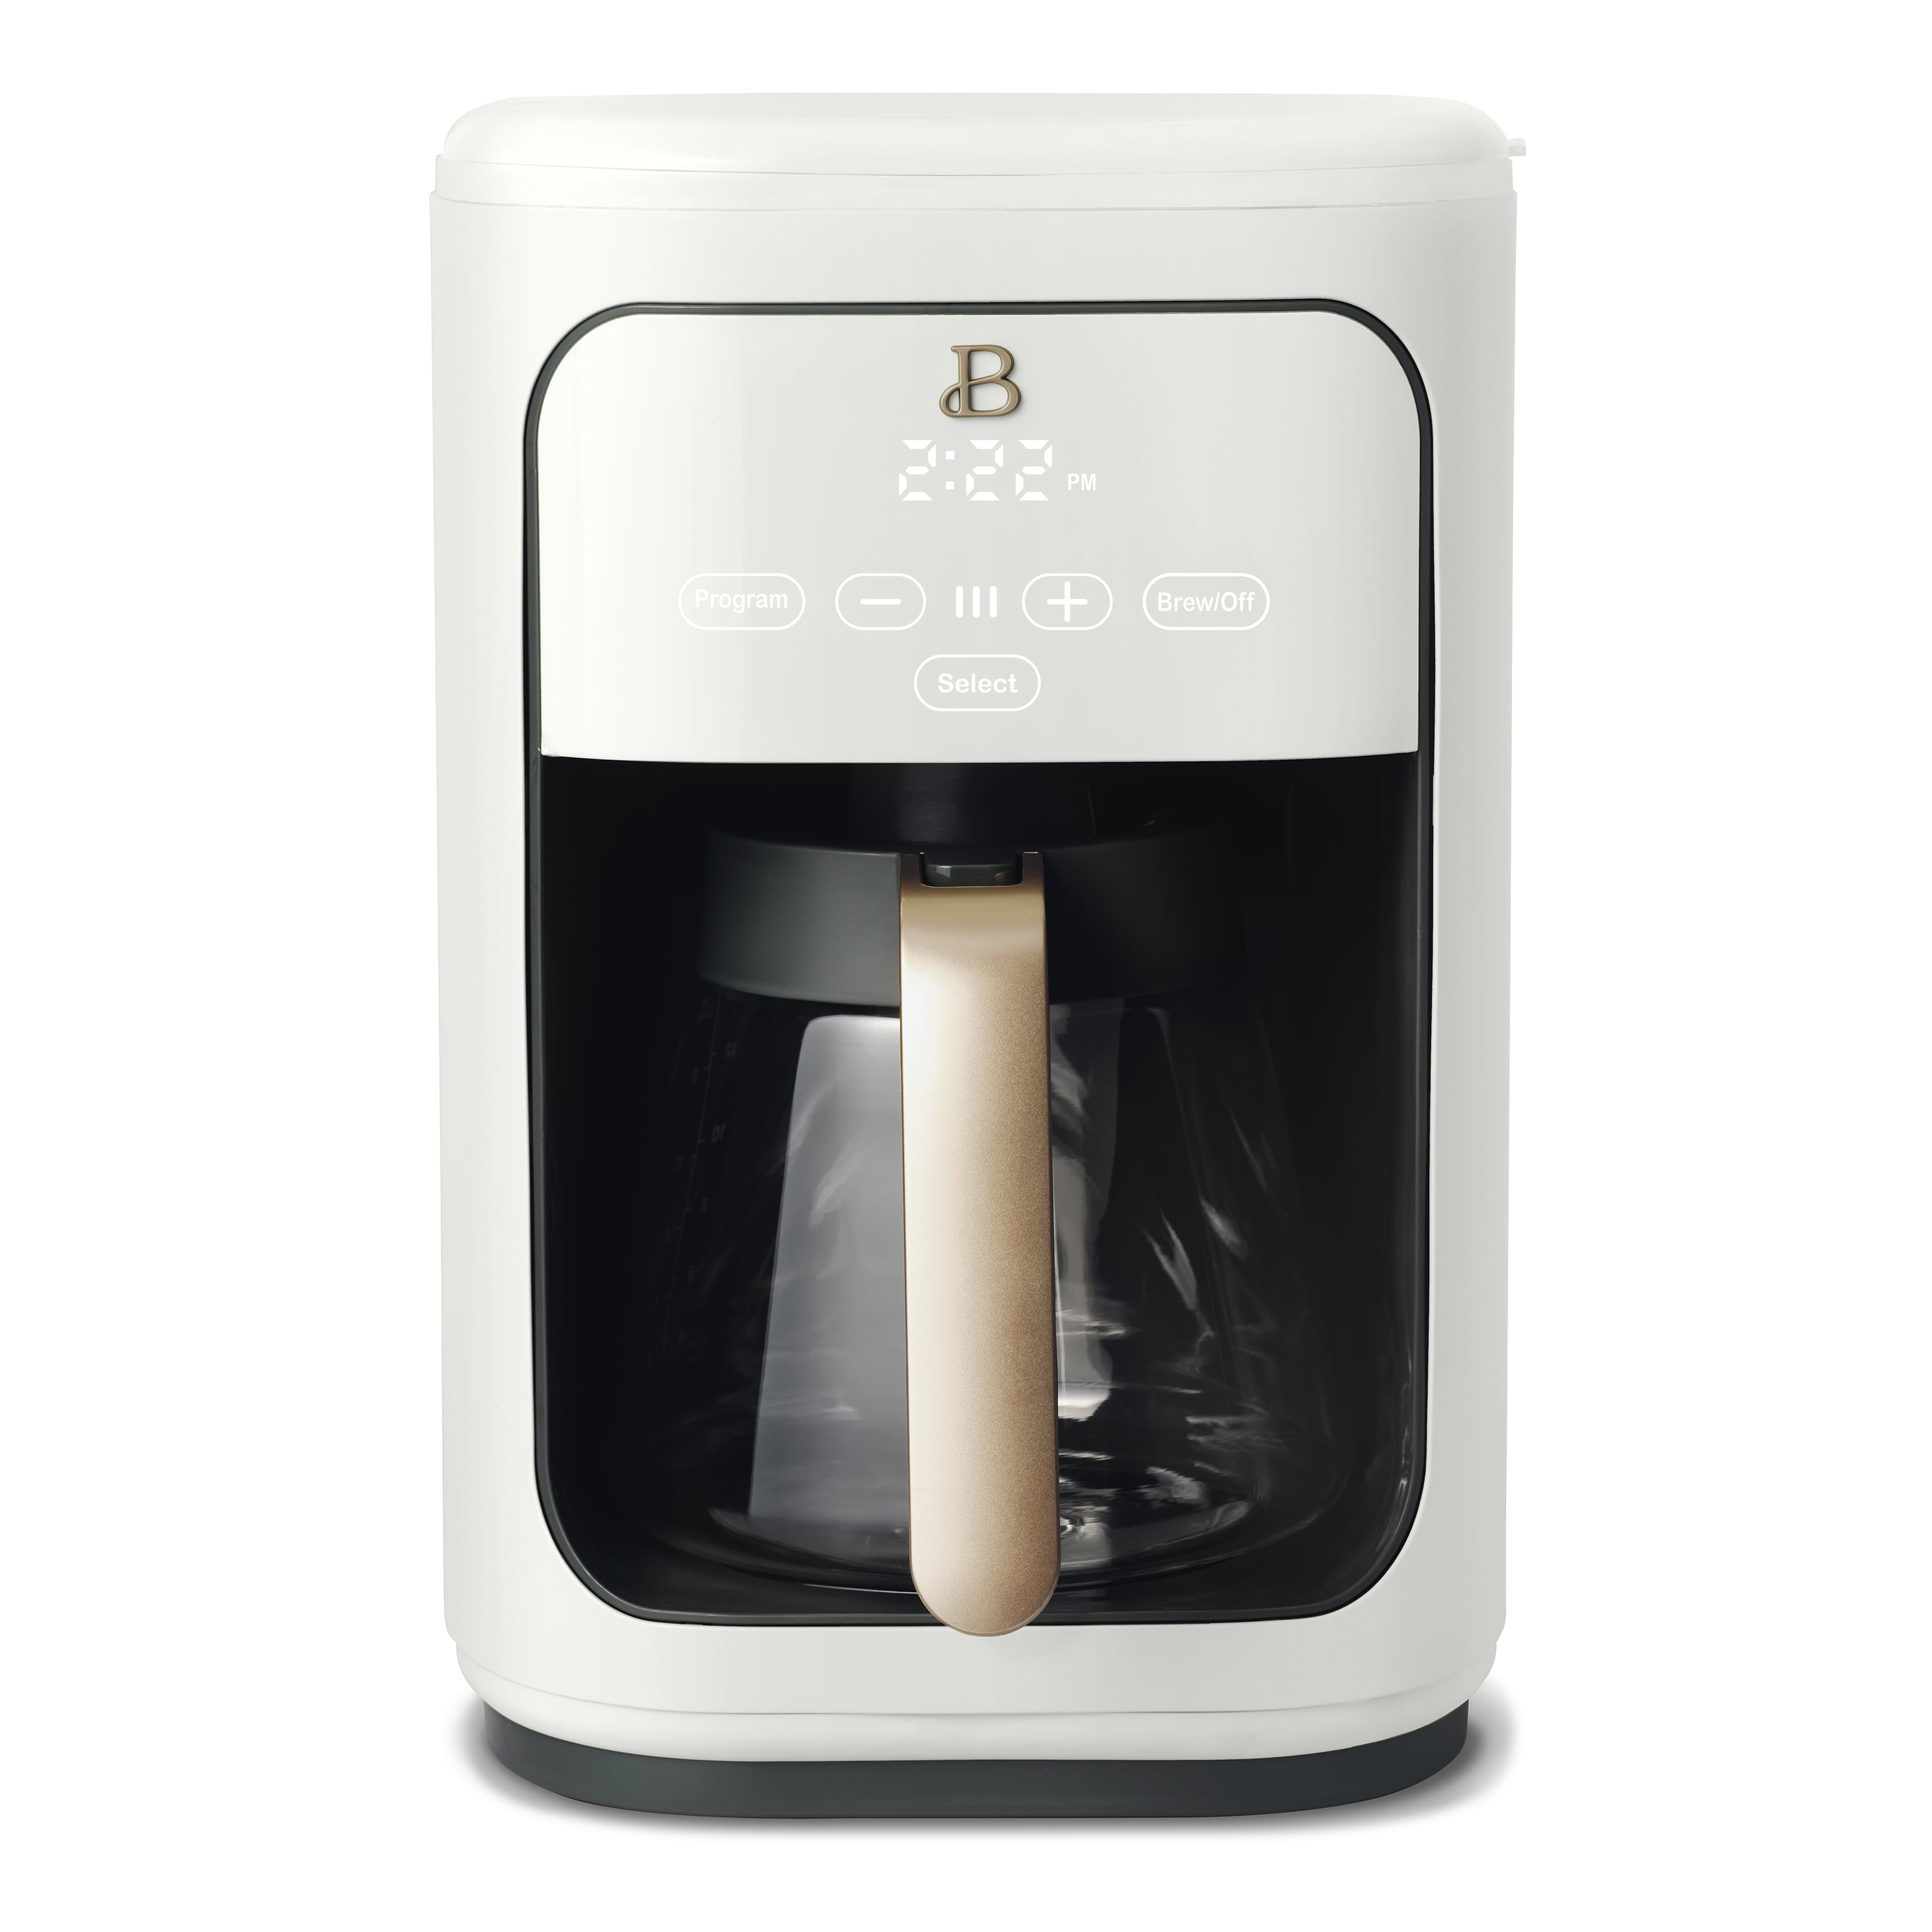 Beautiful 14-Cup Programmable Drip Coffee Maker with Touch-Activated Display, White Icing by Drew Barrymore - Walmart.com